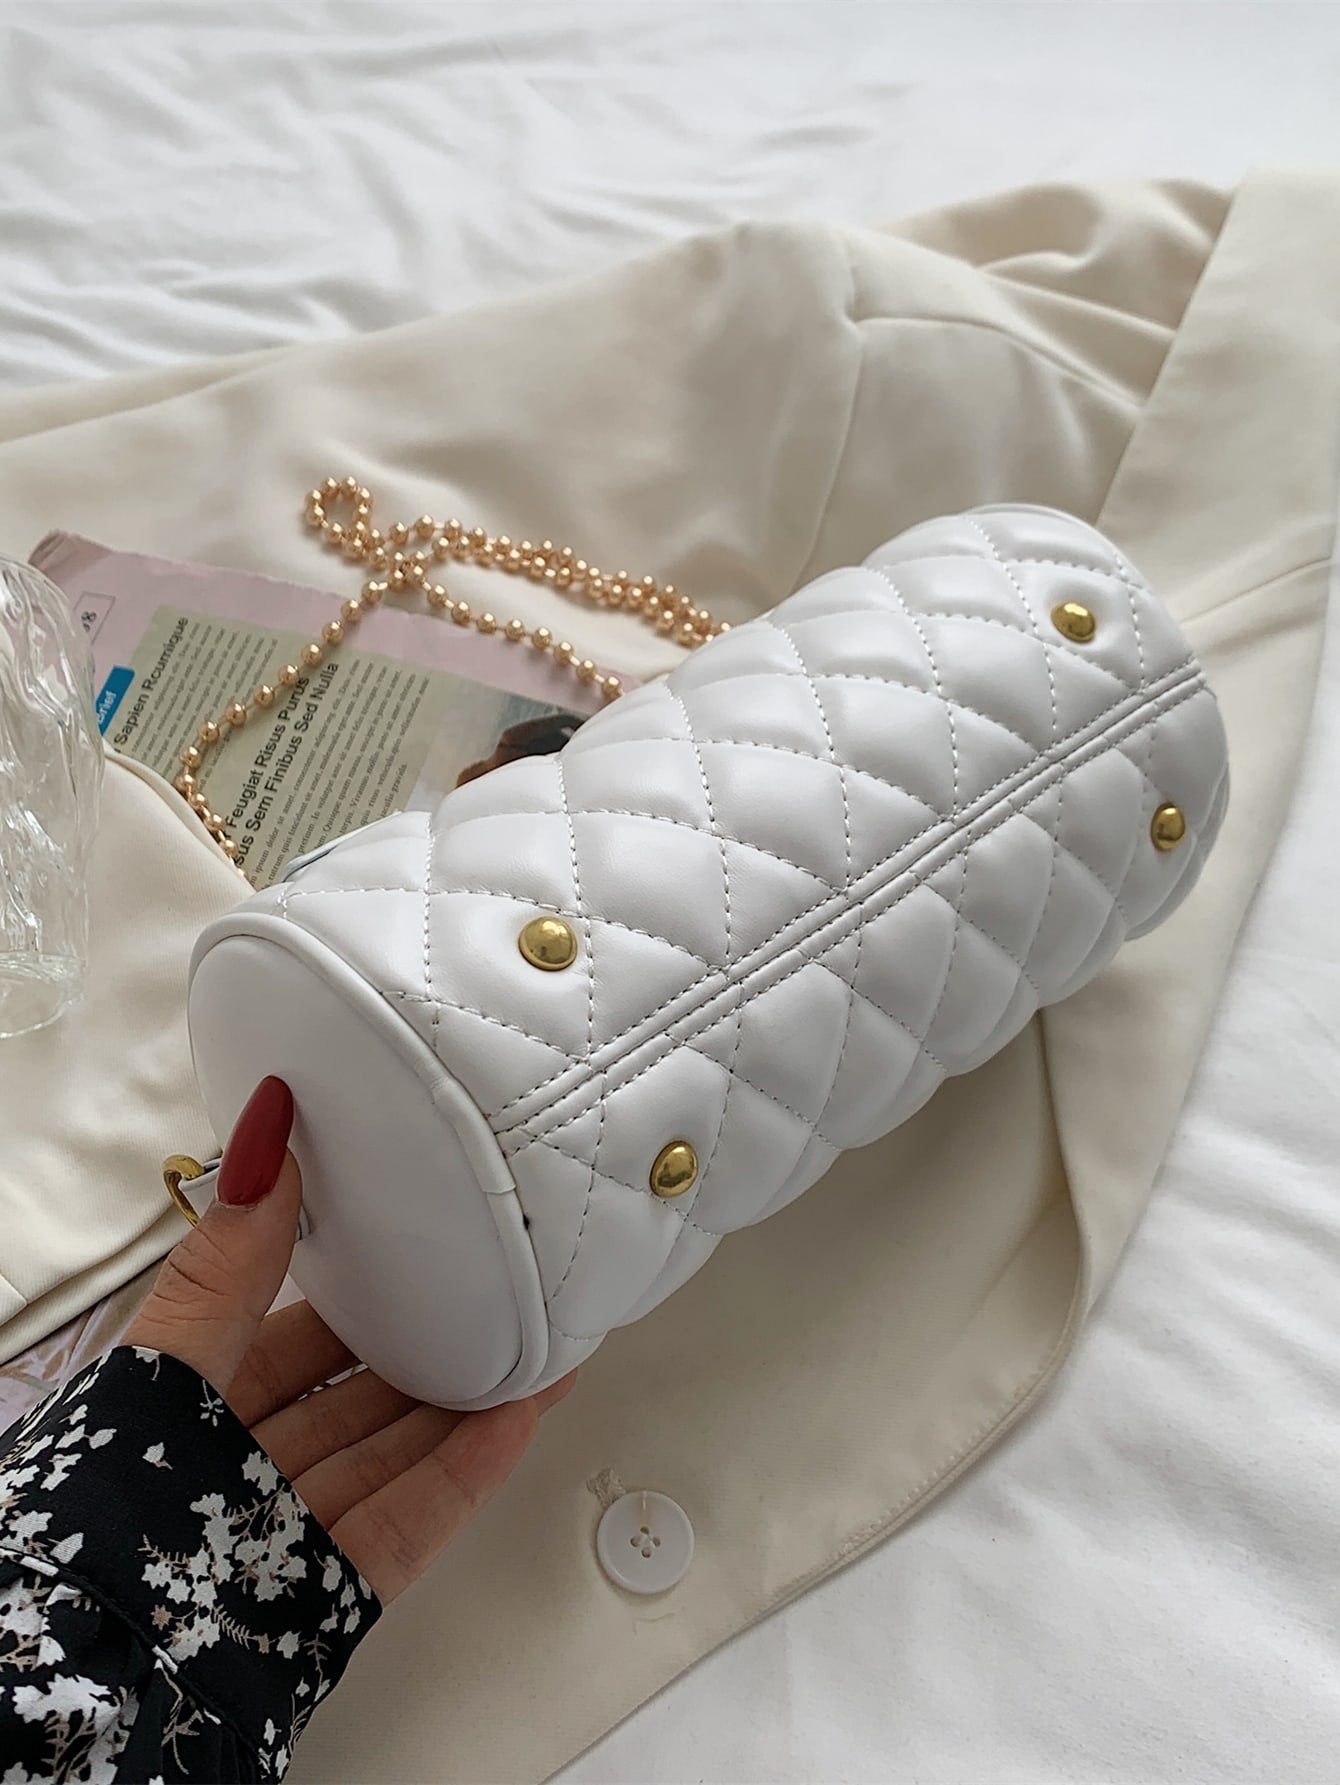 Quilted Chain Satchel Bag